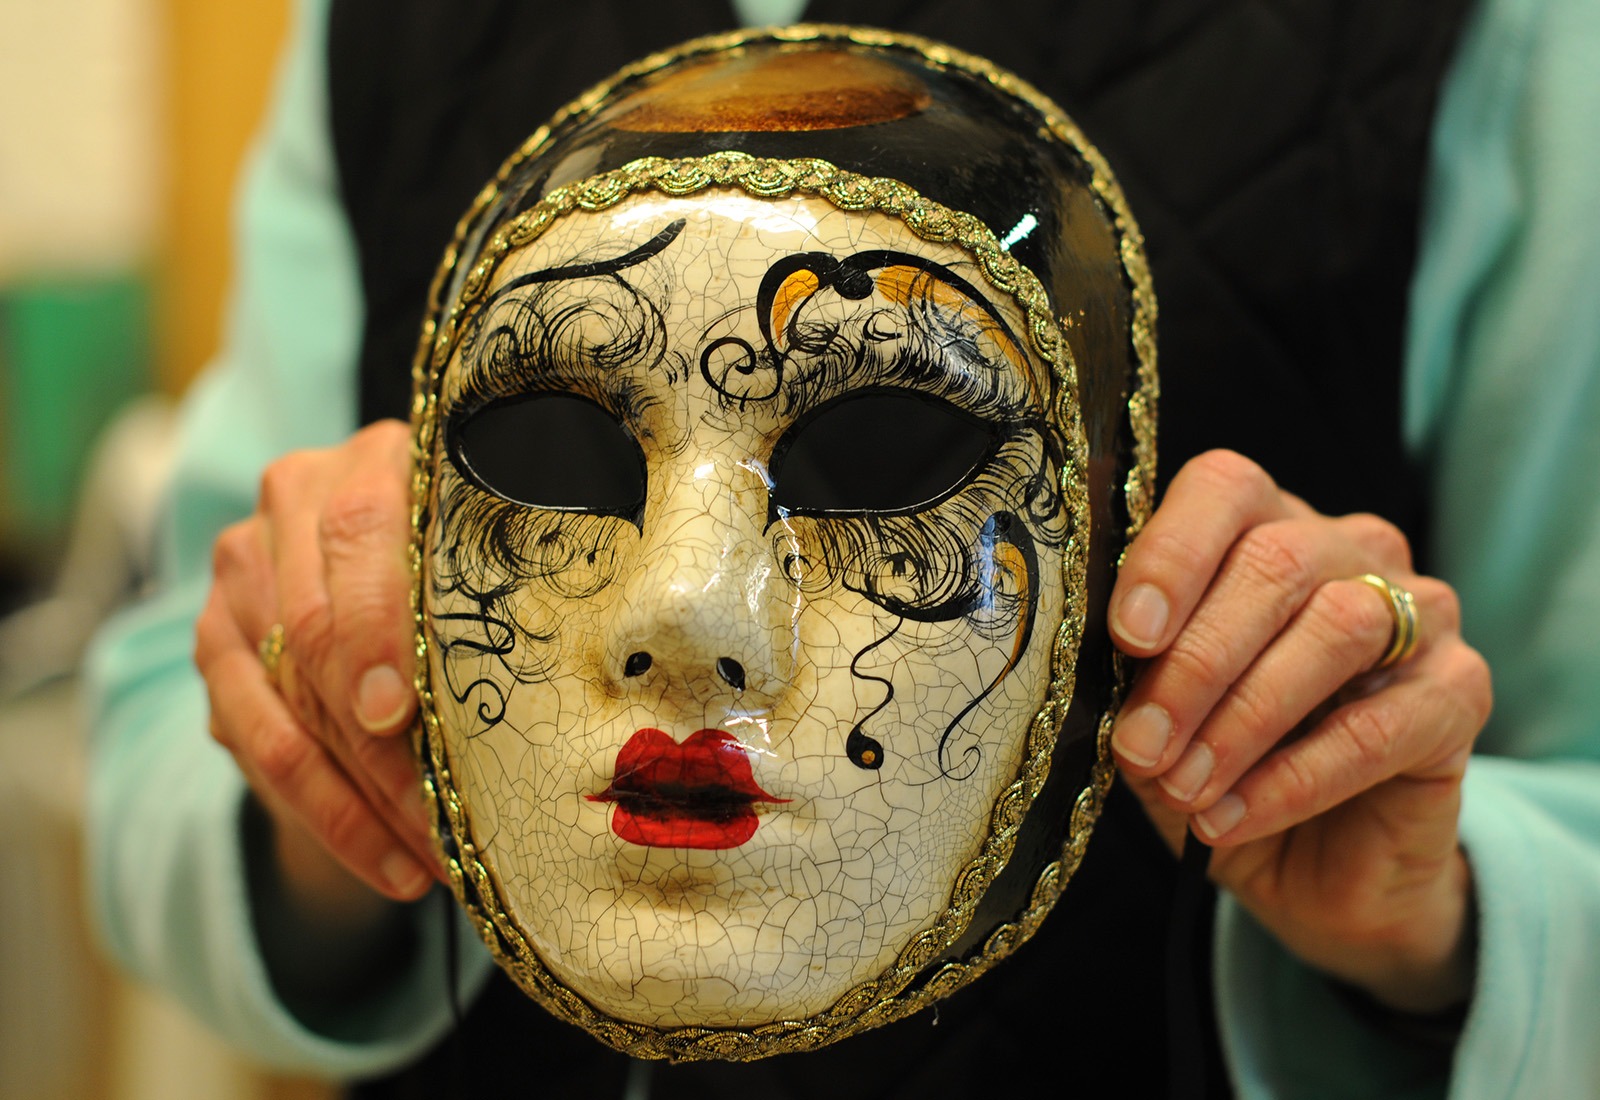 The Art of Masks for the Carnival of Venice Craftsmanship